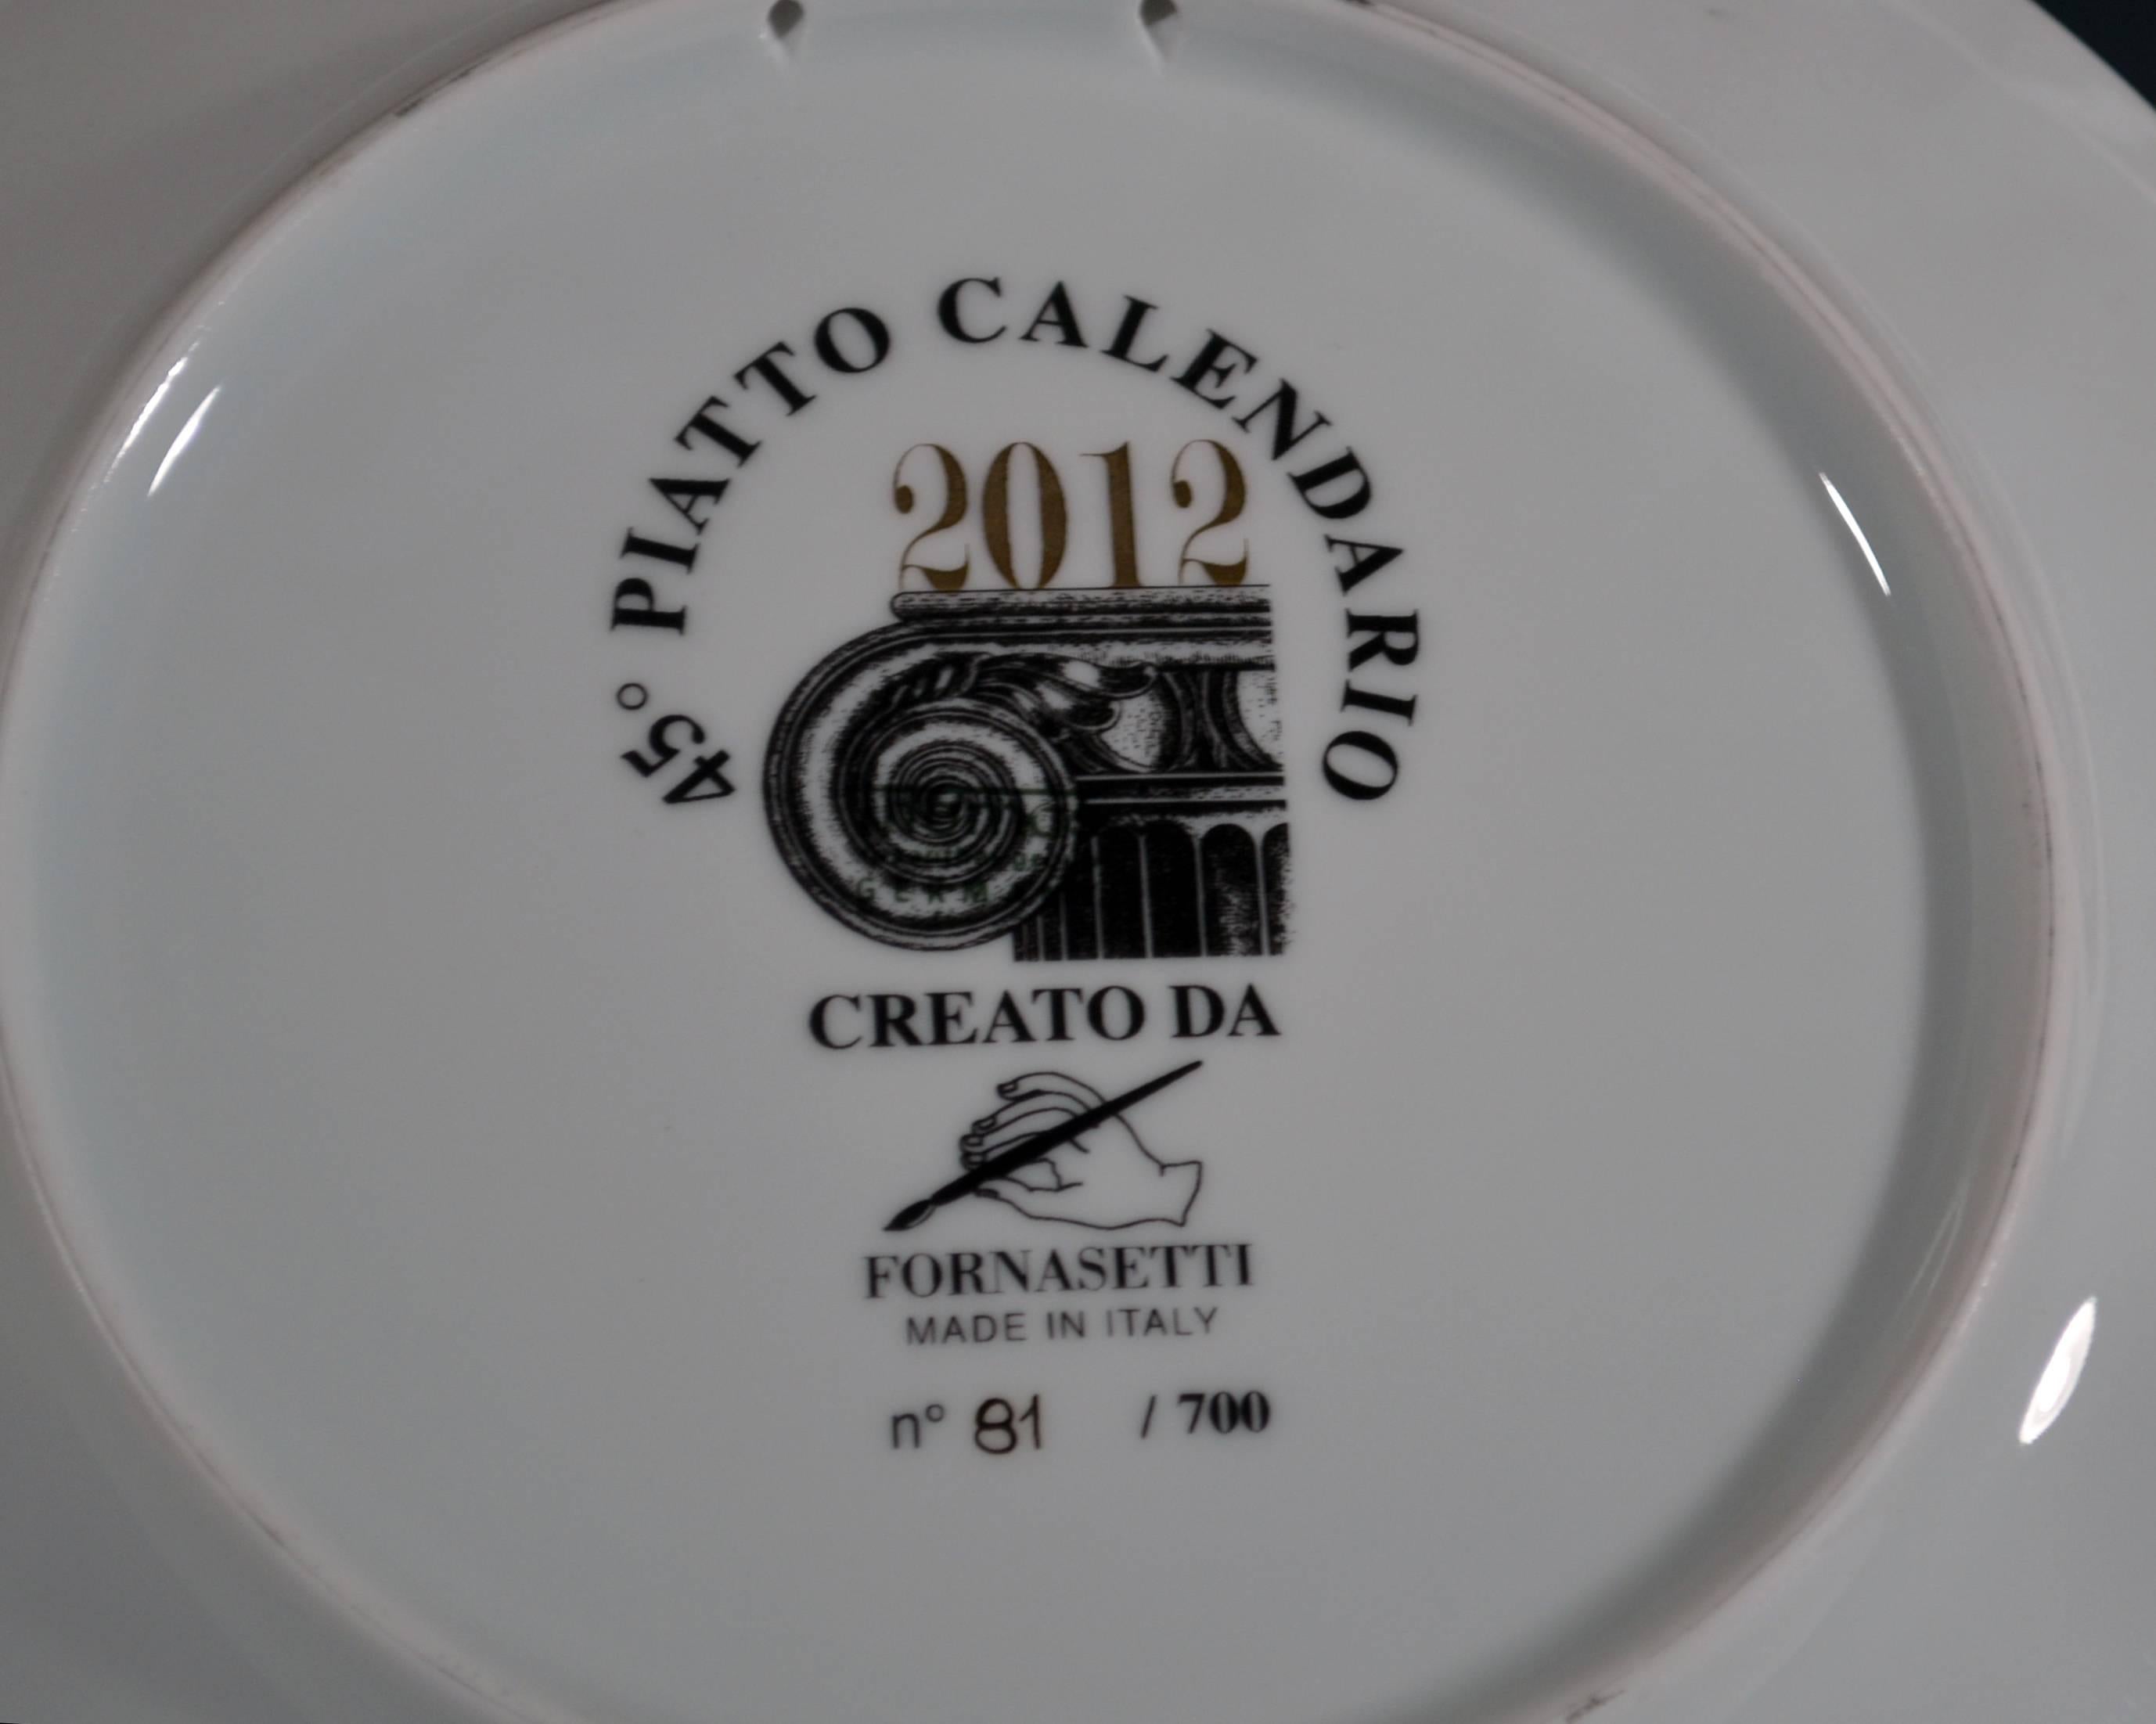 Fornasetti Calendar Plate for 2012, 
Barnaba Fornasetti,
No. 81of 700.

The plate depicts a cupid blowing cards with the days of the months forward with a Grecian Architectural column on the other side of the plate, with the date 2012 and the